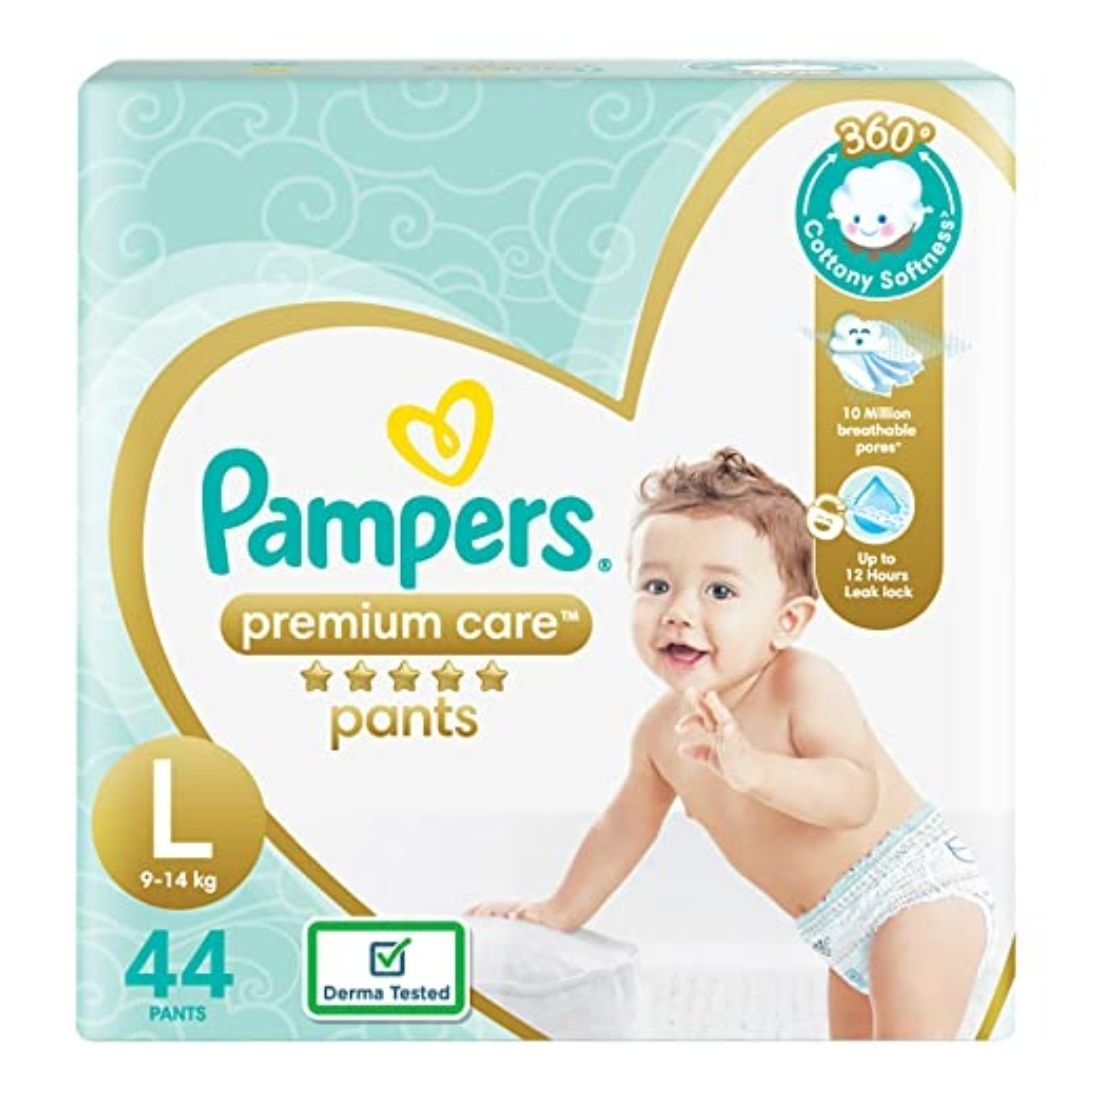 Buy Baby Diapers & Potty Training Seat Online at Best Price - Snapdeal